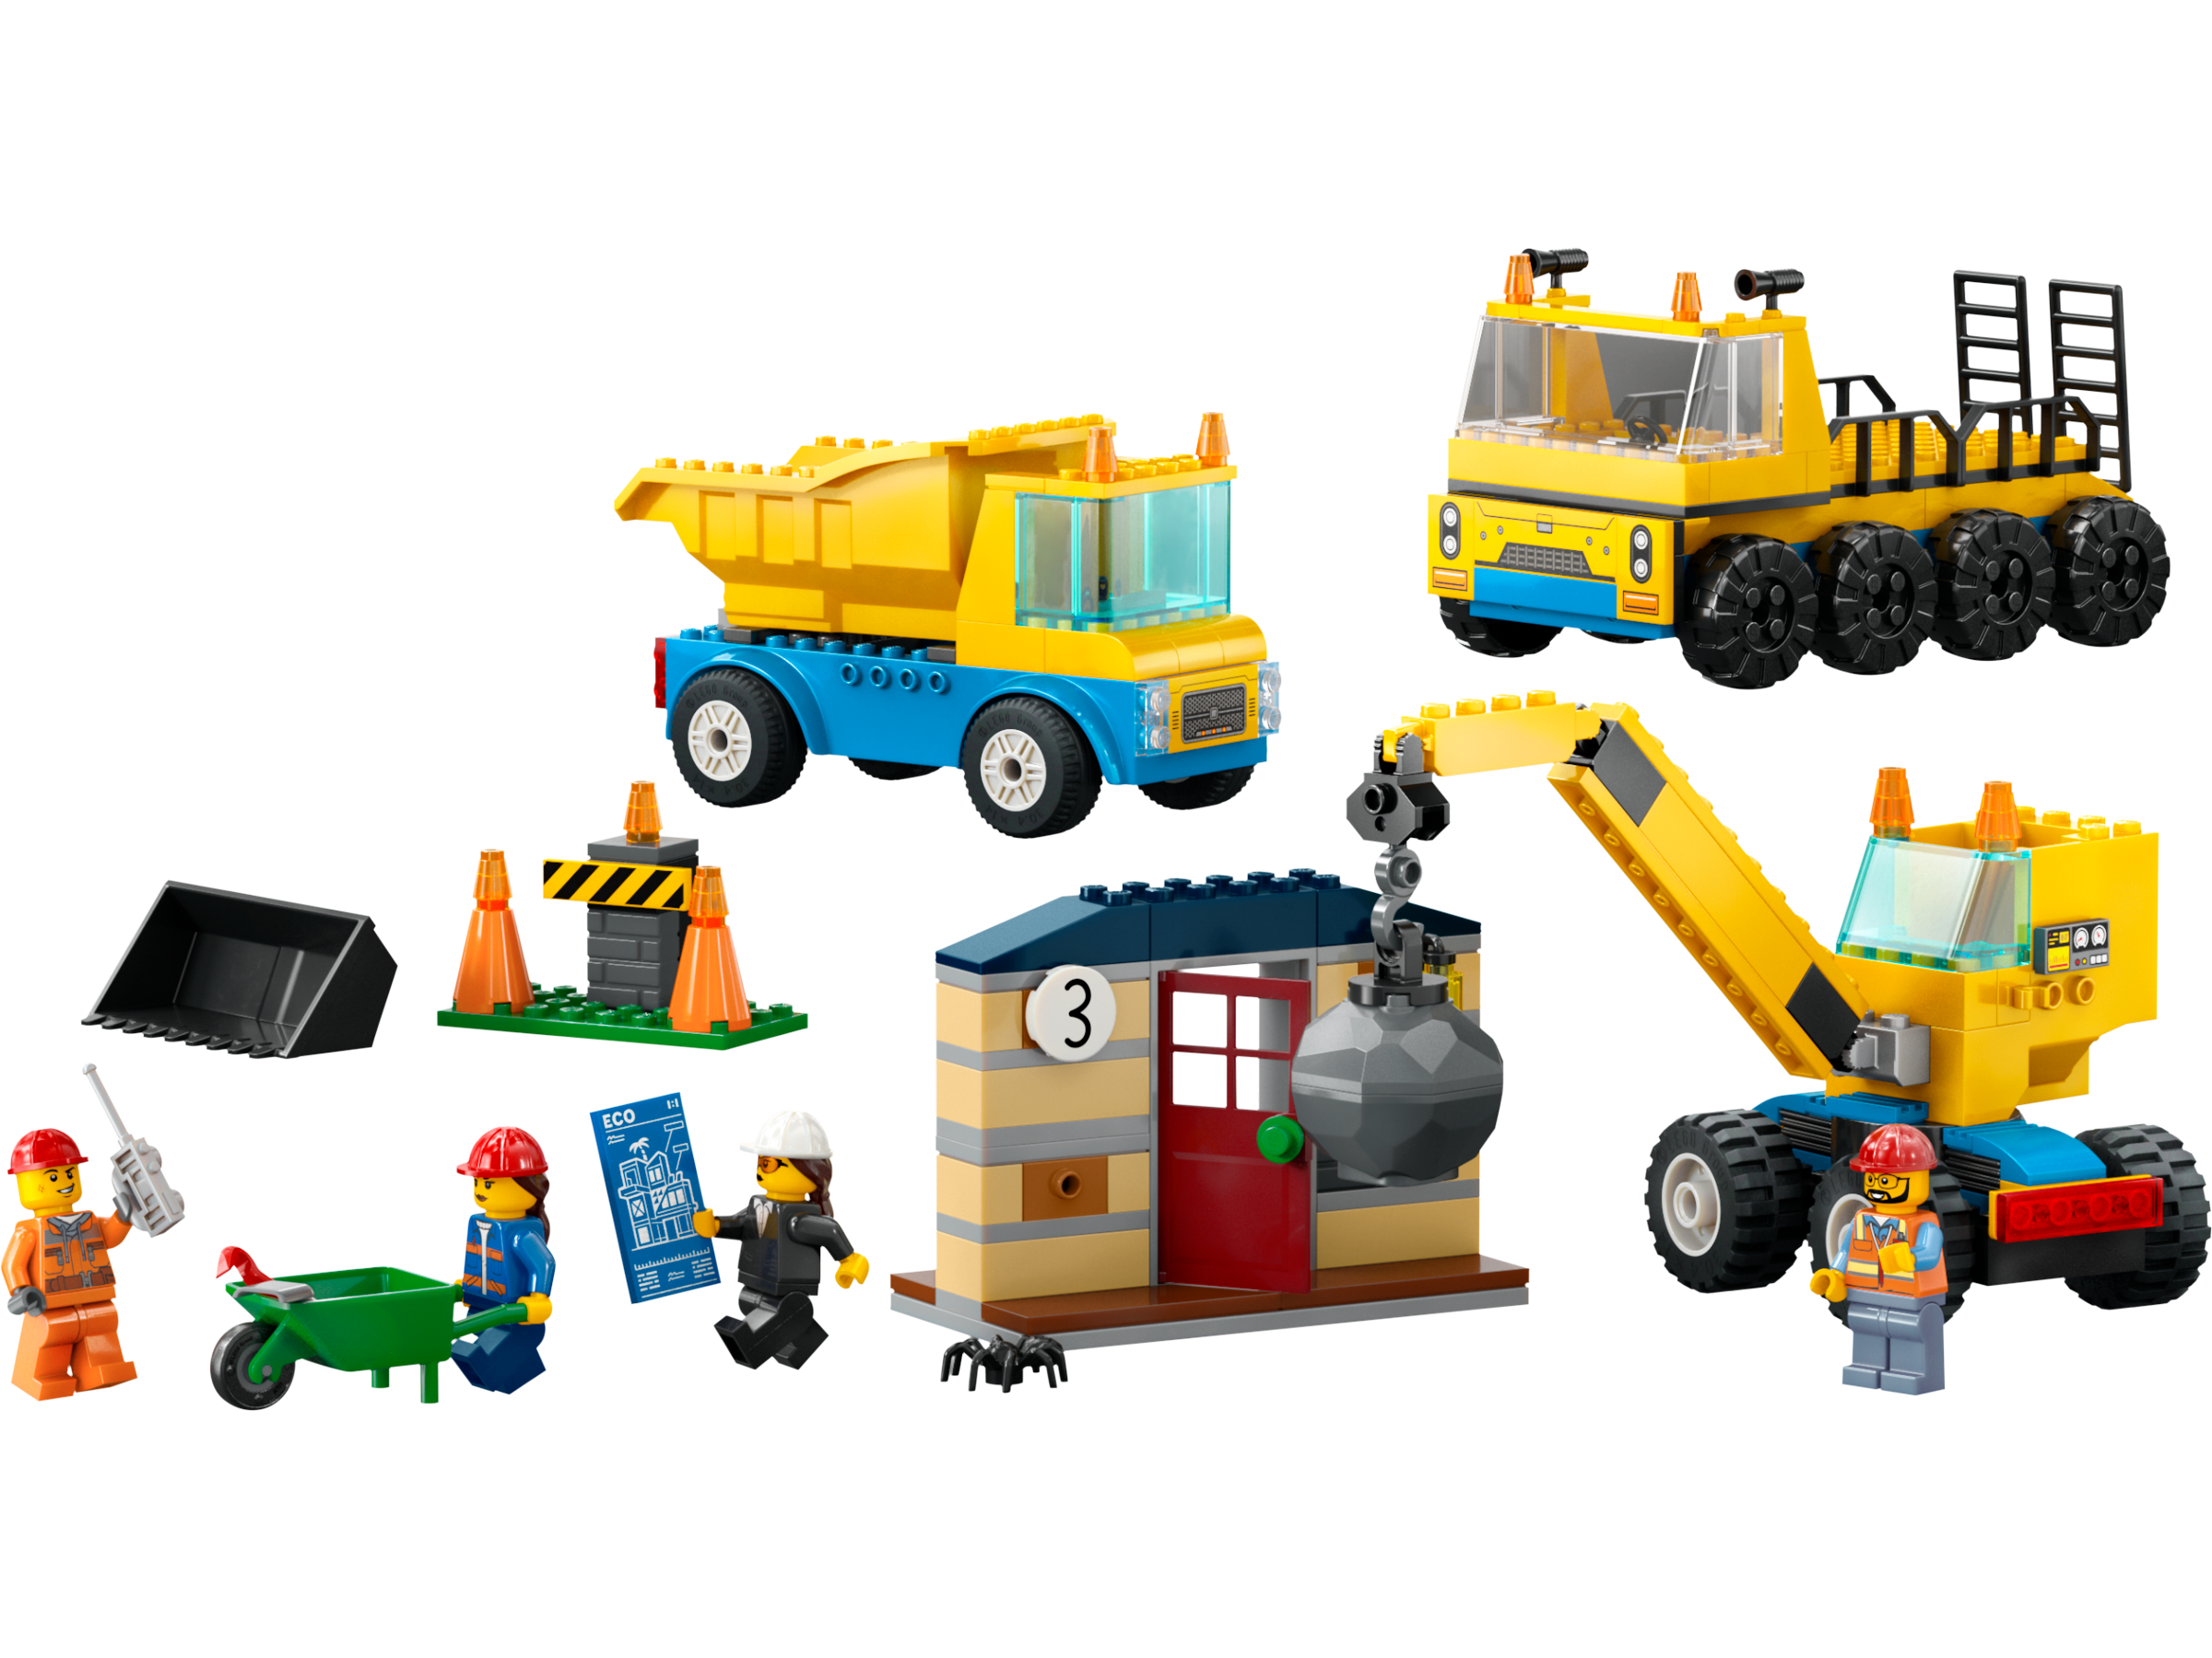 Construction Trucks and Wrecking Ball Crane 60391 | City | Buy online at  the Official LEGO® Shop BE